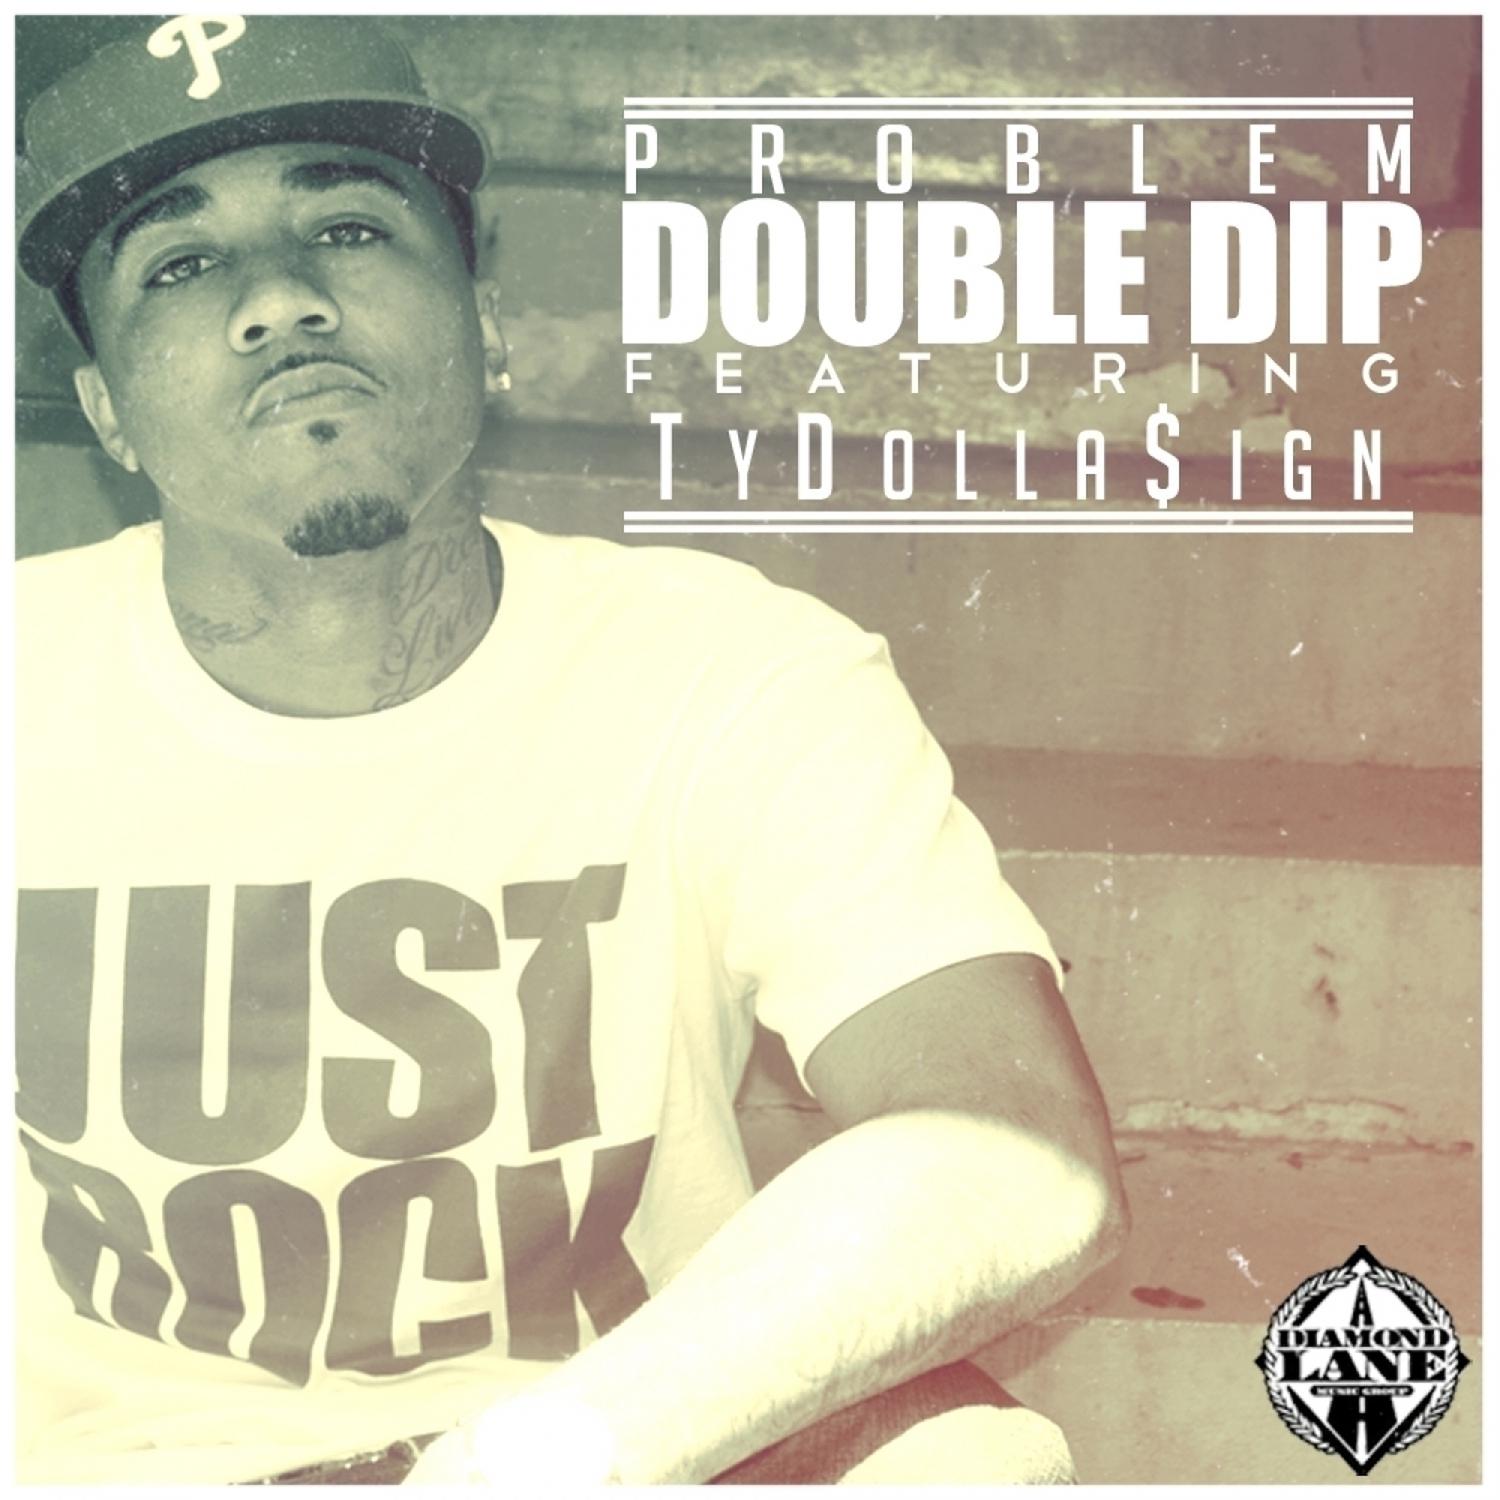 Double Dip (feat. Ty Dolla $ign)